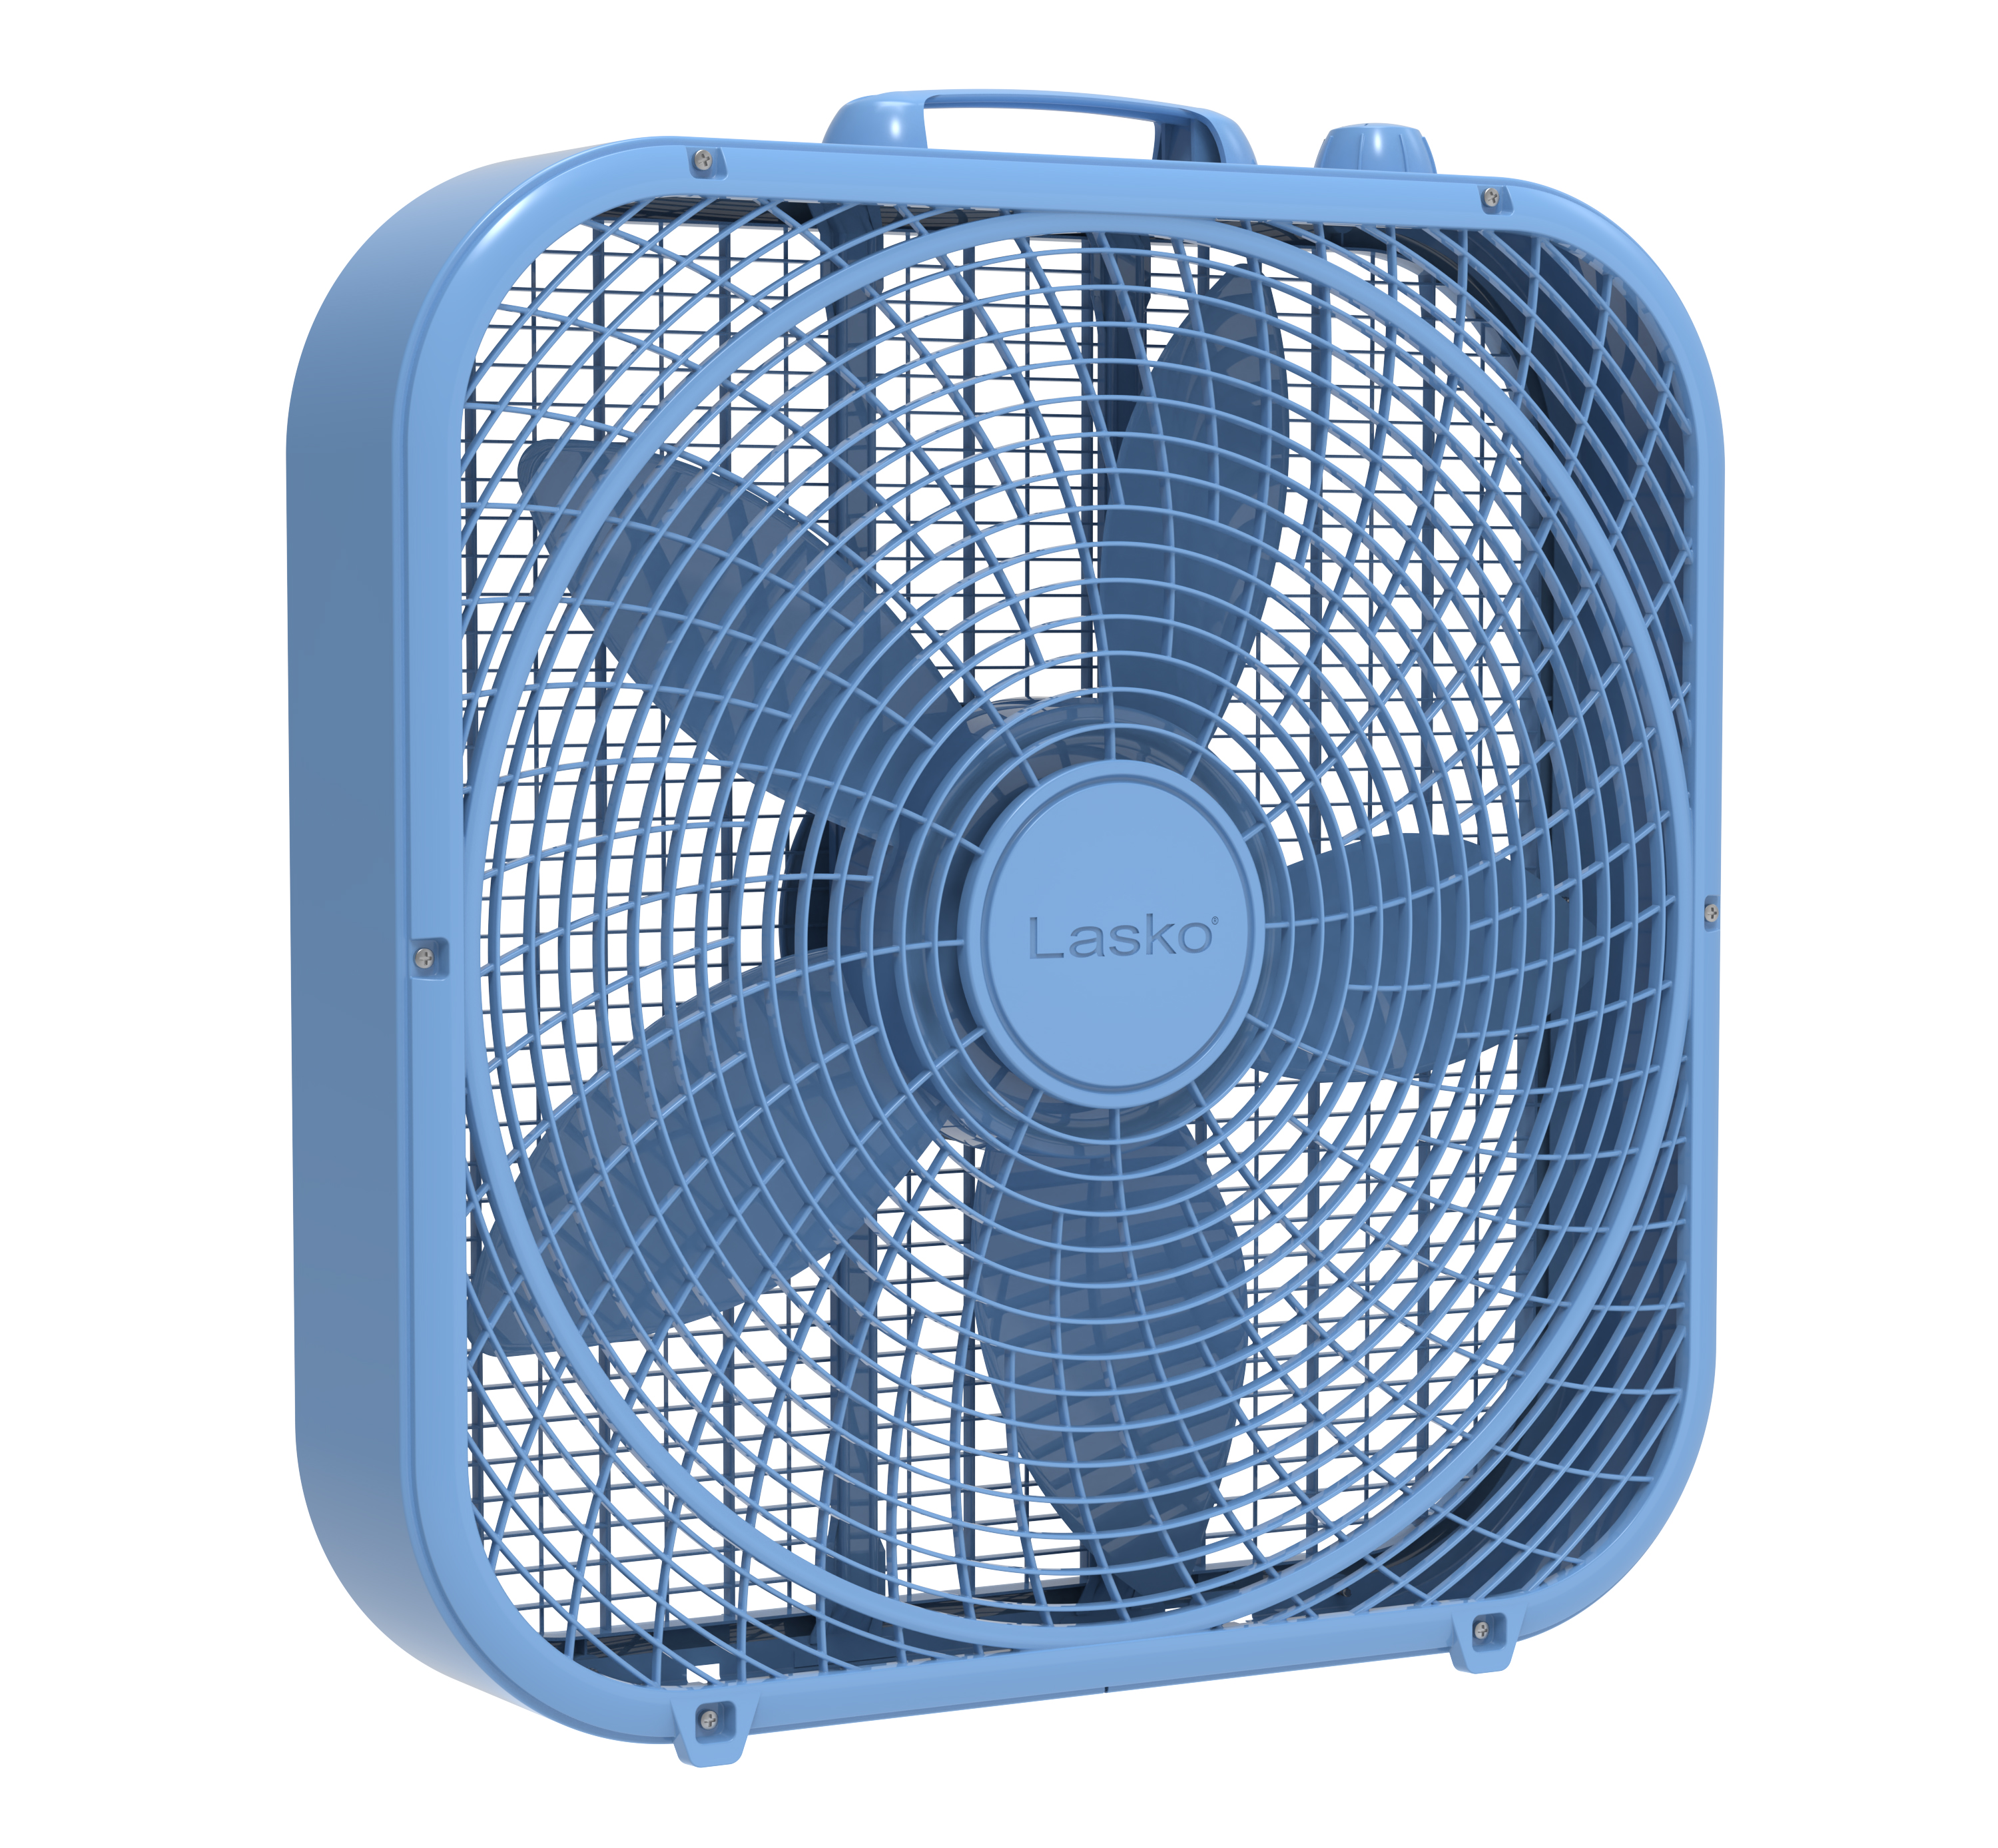 Lasko 20" Cool Colors 3-Speed Box Fan with Weather-Resistant Motor, Blue, 22.5" High, B20310, New - image 1 of 7